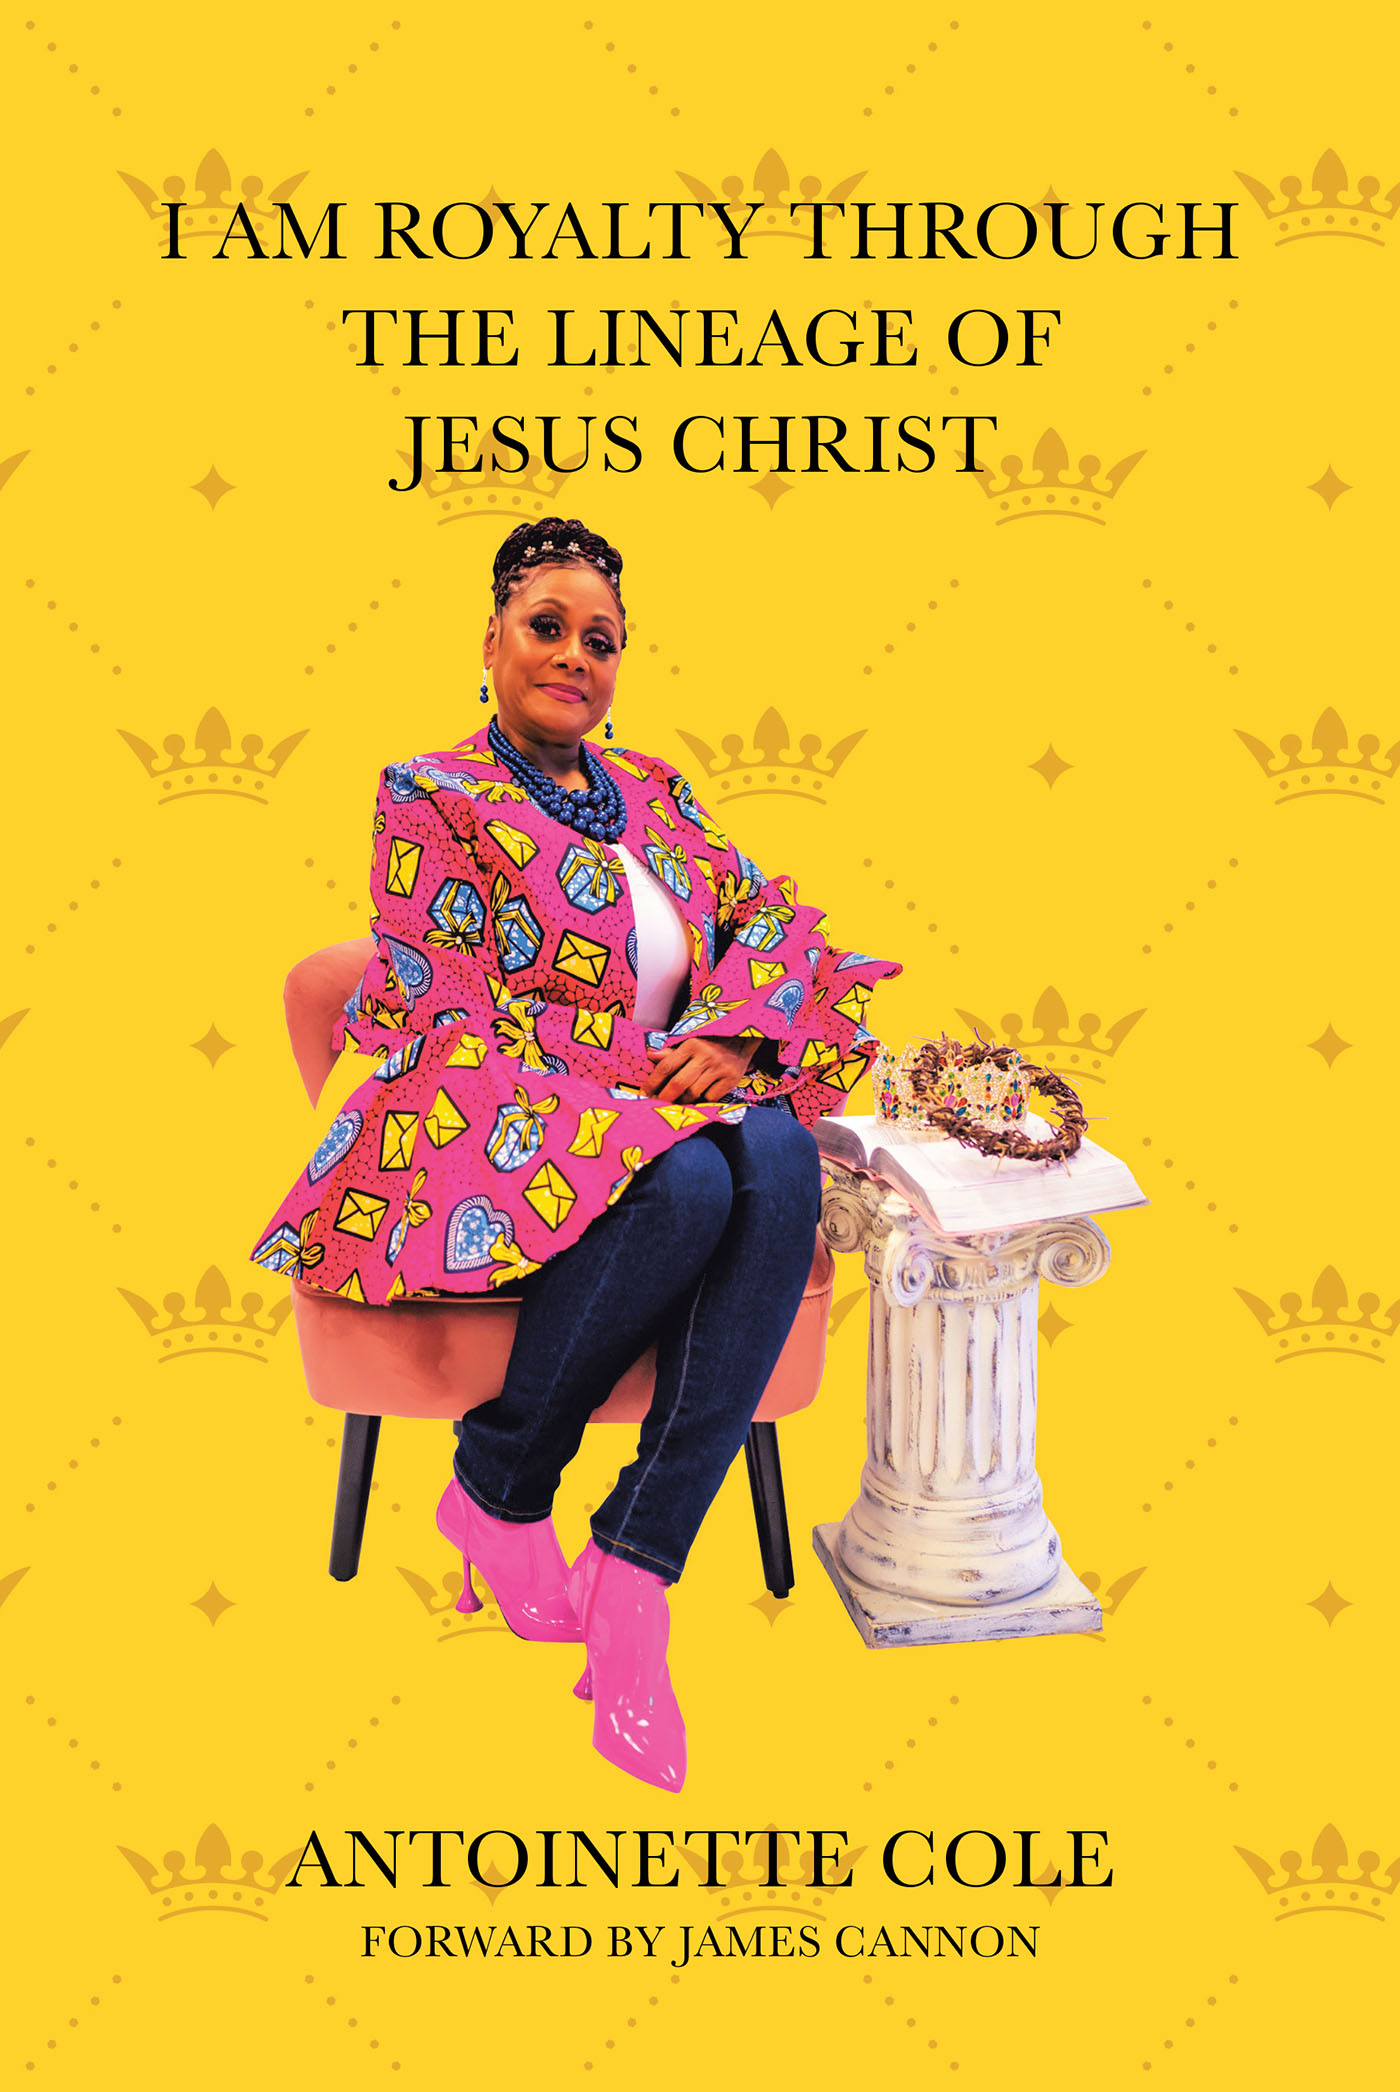 Author Antoinette Cole’s New Book, "I Am Royalty: Through the Lineage of Jesus Christ," is a Devotional That Will Help Readers Understand More About Jesus Christ